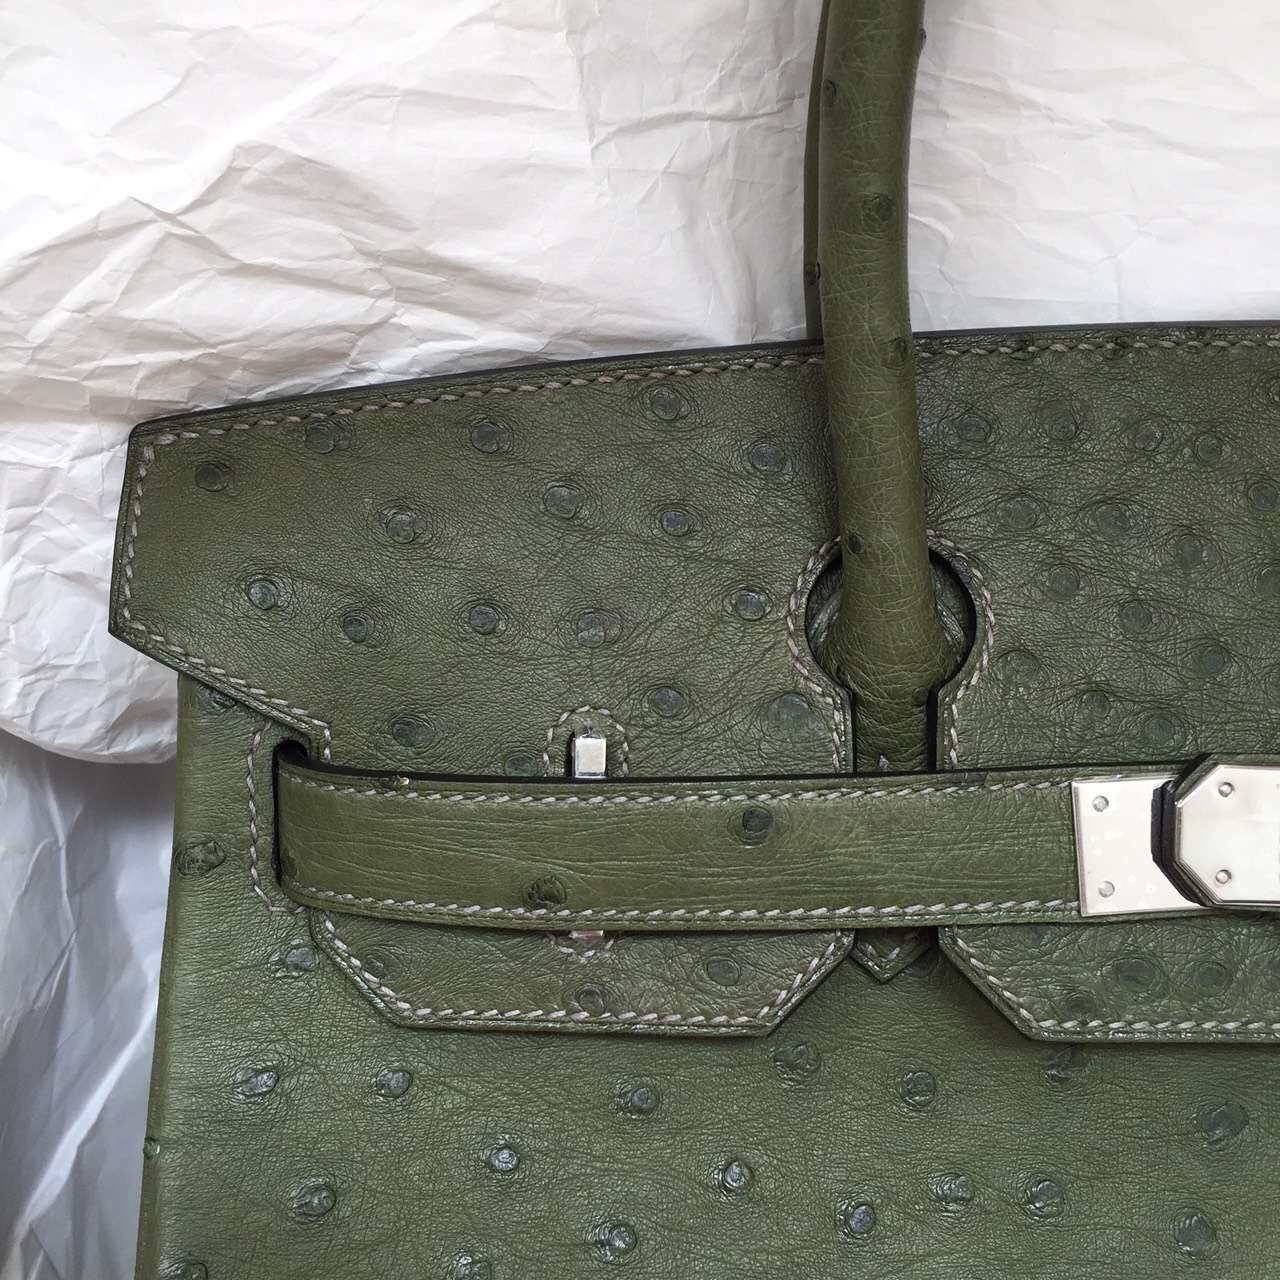 Hand Stitching Hermes Birkin 30CM in V6 Canopee Green Ostrich Leather Tote Bag